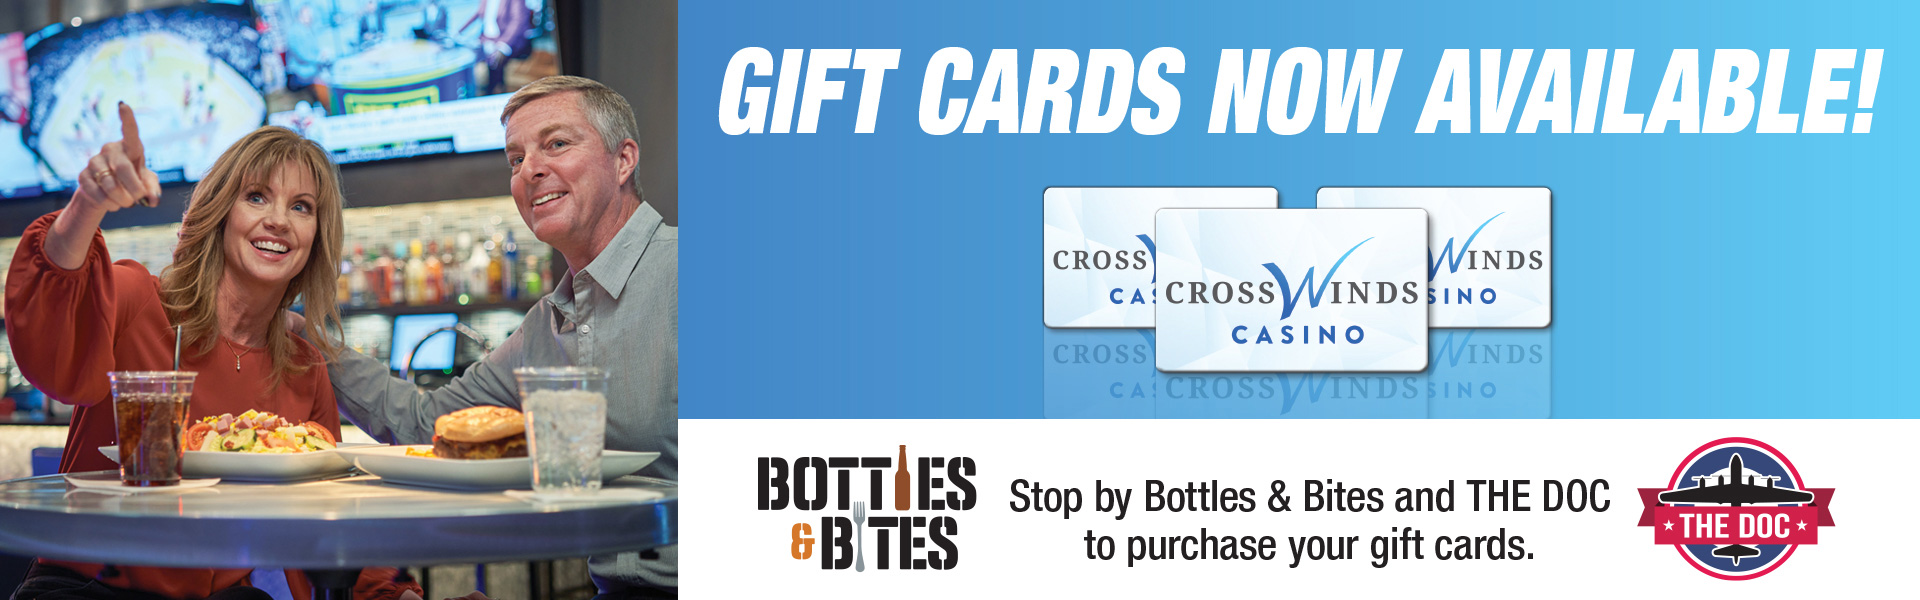 GIFT CARDS NOW AVAILABLE!